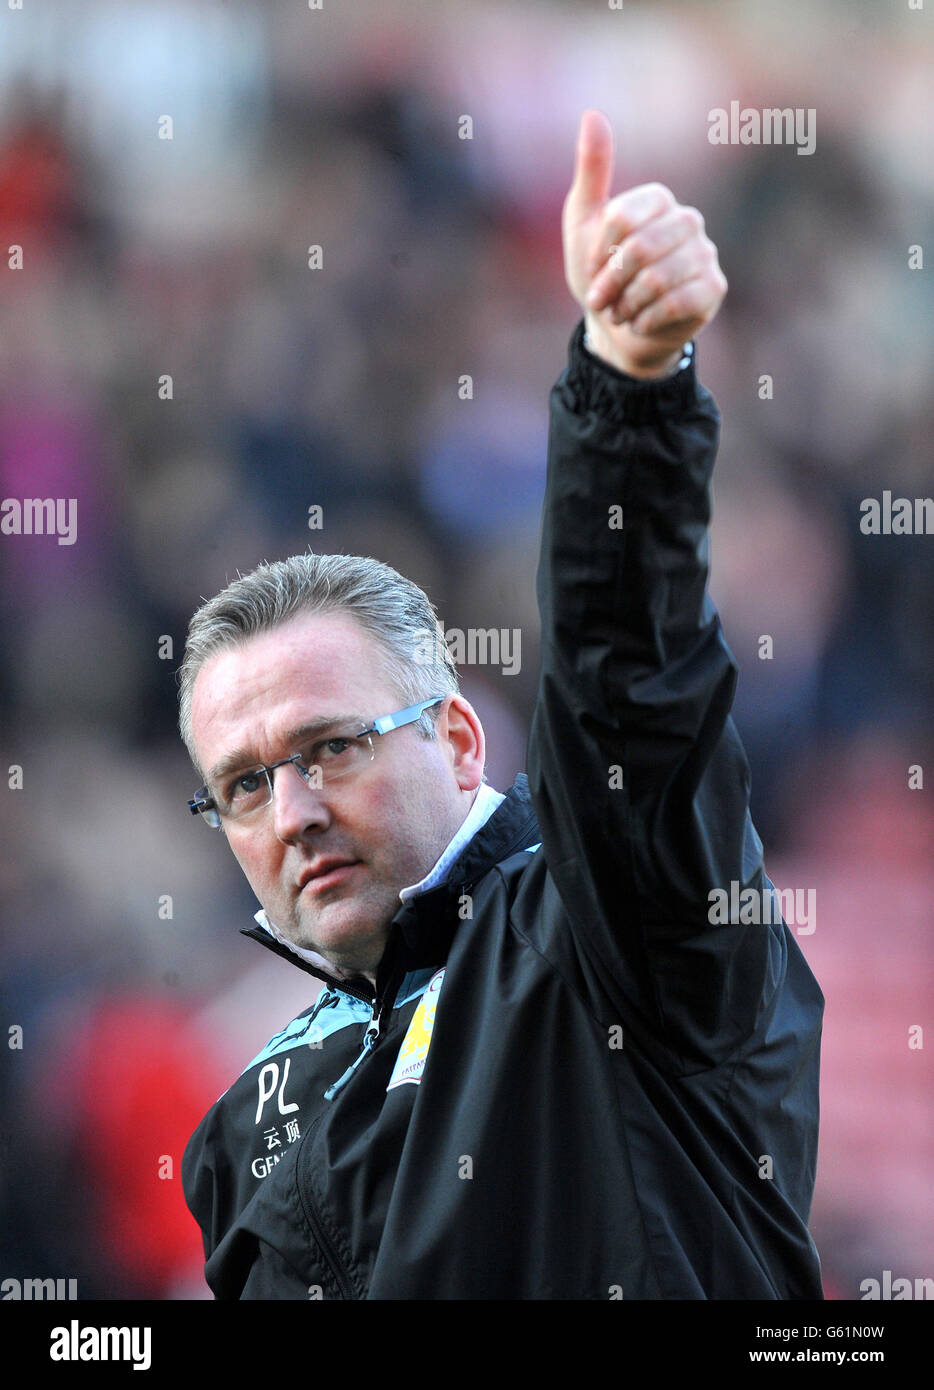 Aston Villa Manager Paul Lambert gives the thumbs up after their victory during the Barclays Premier League match at the Britannia Stadium, Stoke on Trent. PRESS ASSOCIATION Photo. Picture date: Saturday April 6, 2013. See PA Story SOCCER Stoke. Photo credit should read: Neal Simpson/PA Wire. Stock Photo